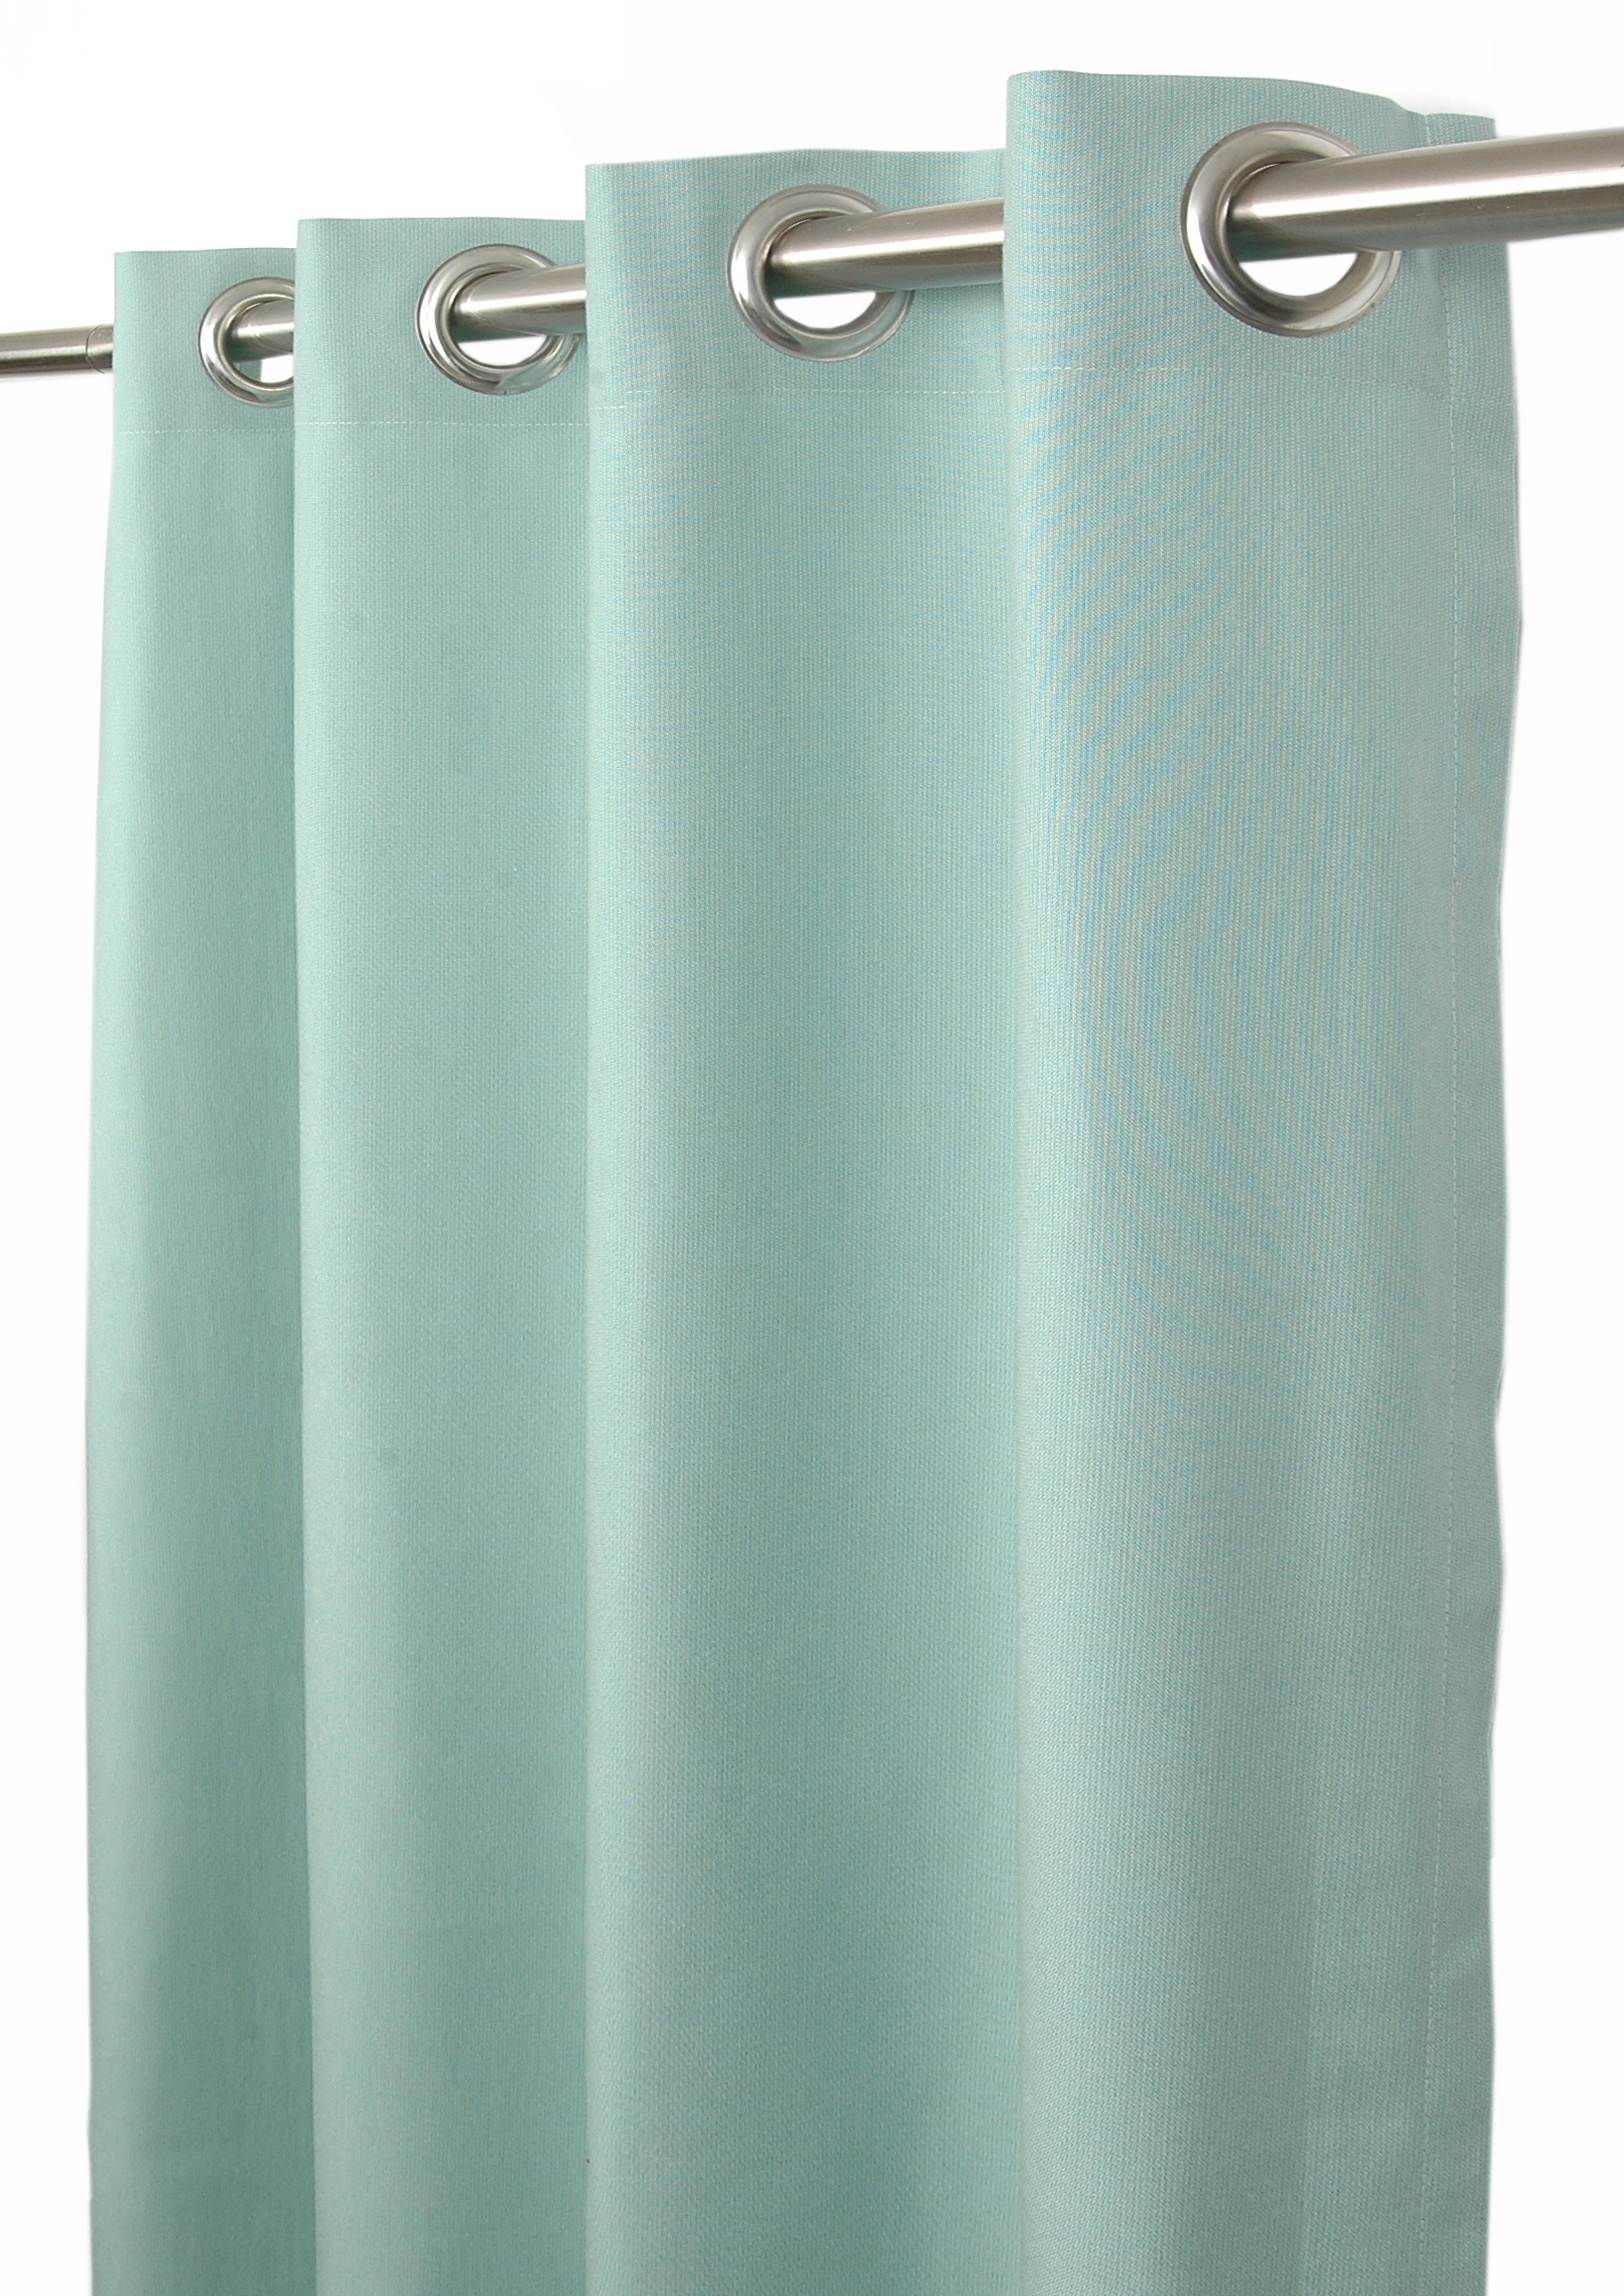 Sunbrella Spectrum Mist Indoor/Outdoor Curtain Panel by Sweet Summer Living, 50" x 108" with Stainless Steel Grommets - image 1 of 1